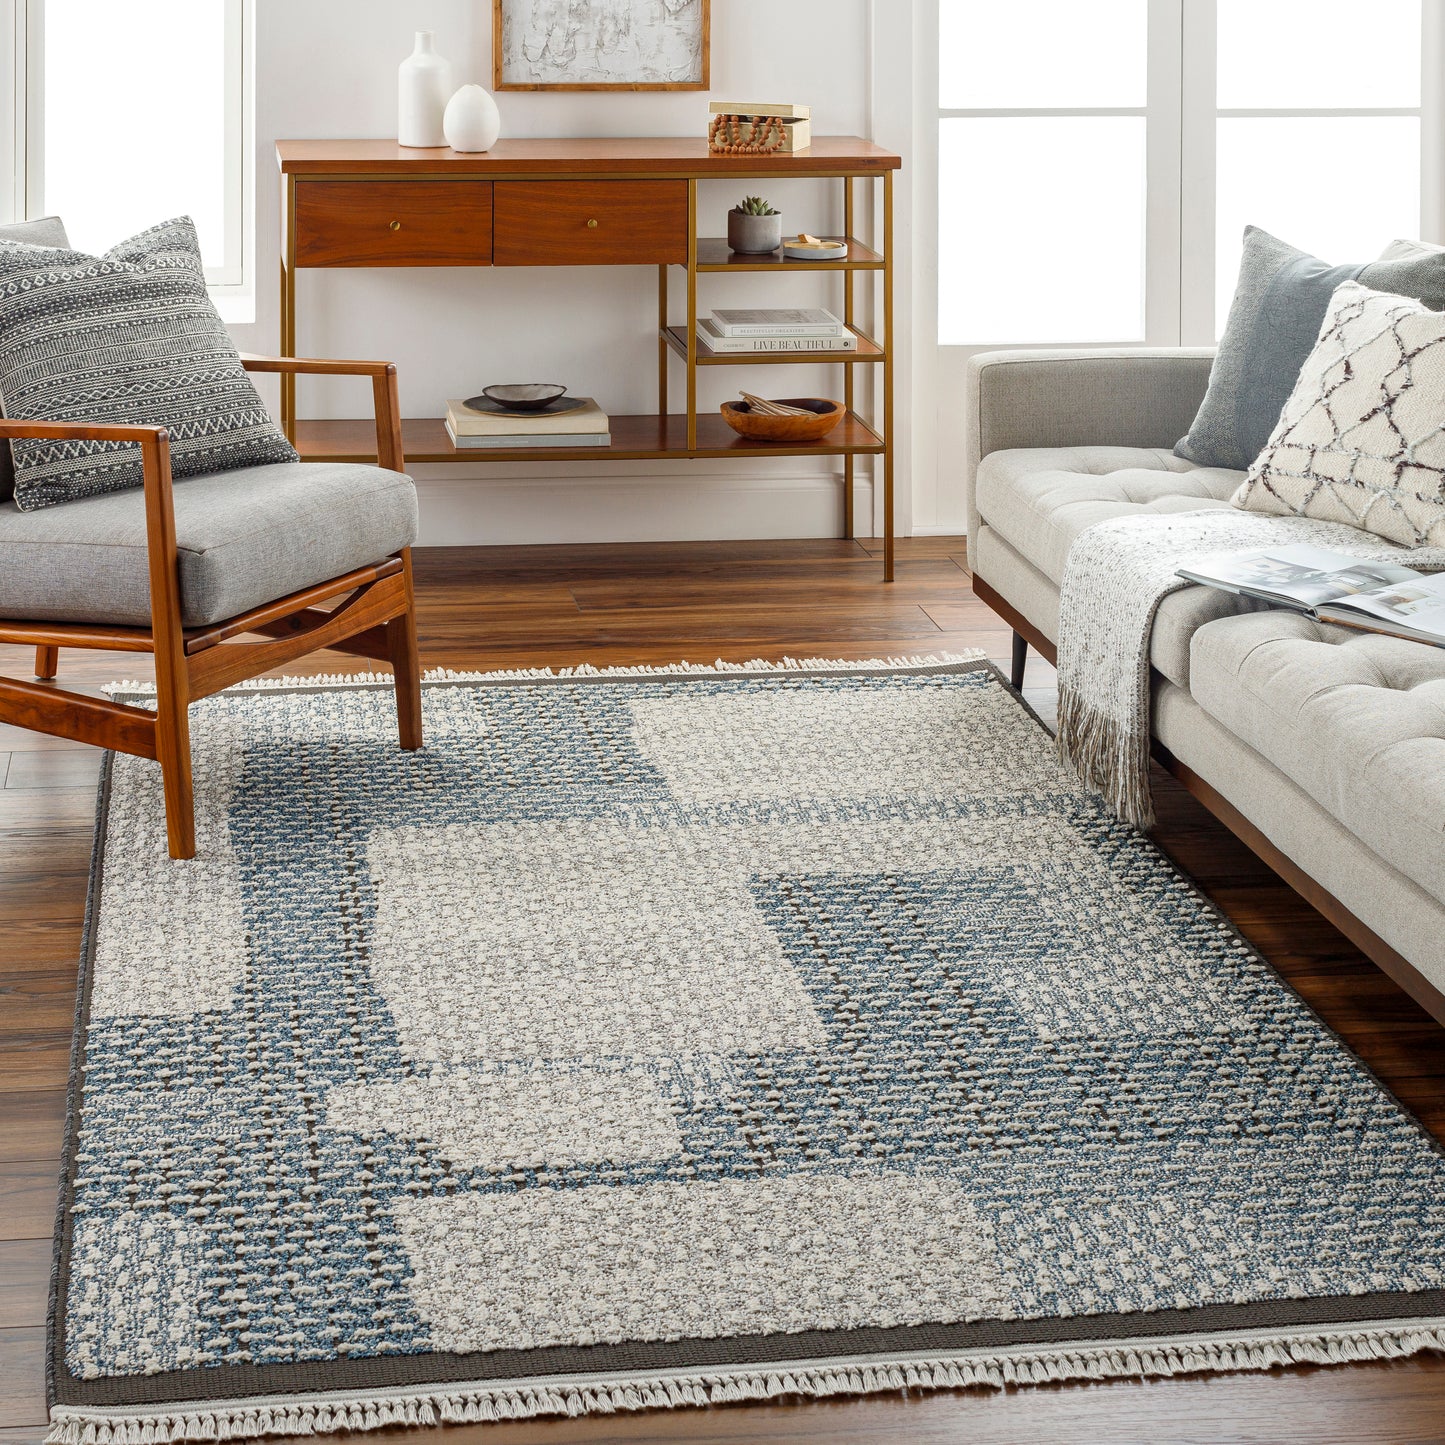 Berlin 31734 Machine Woven Synthetic Blend Indoor Area Rug by Surya Rugs